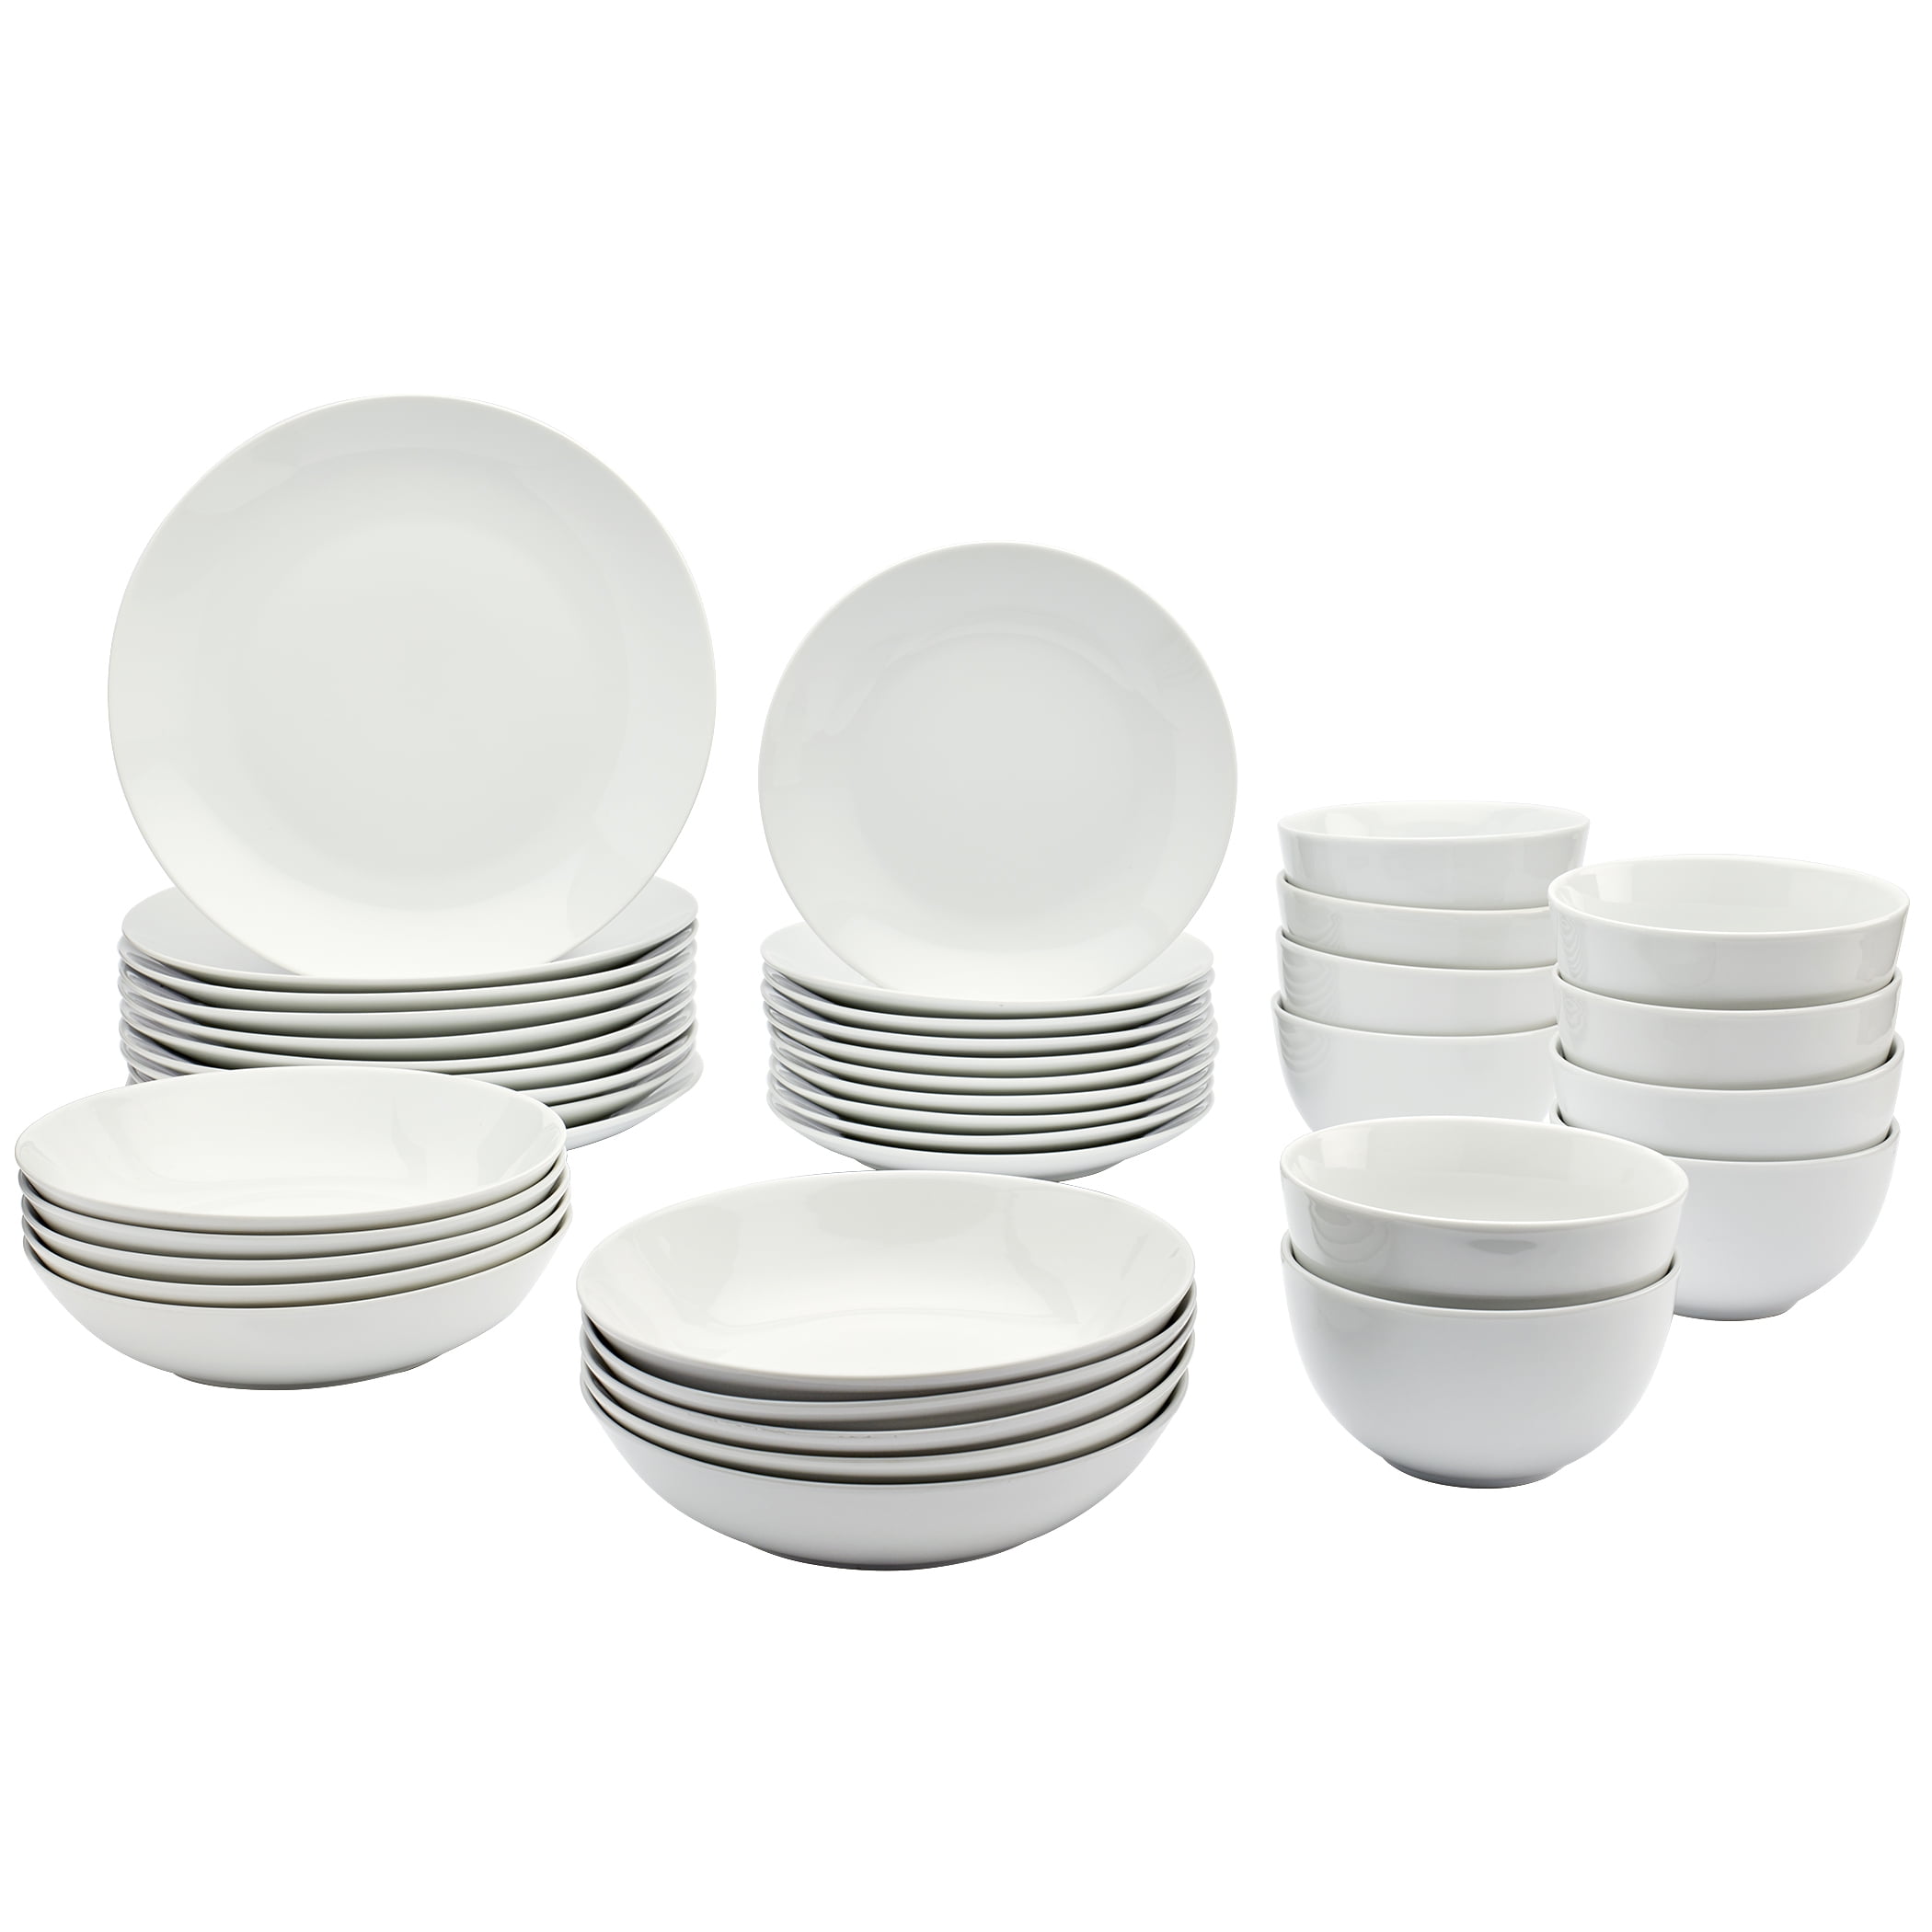 Tabletops Gallery Bloom 3 Piece Serving Bowl Set Embossed Bone White  Porcelain Round Dinnerware Collection- Chip Resistant Scratch Resistant